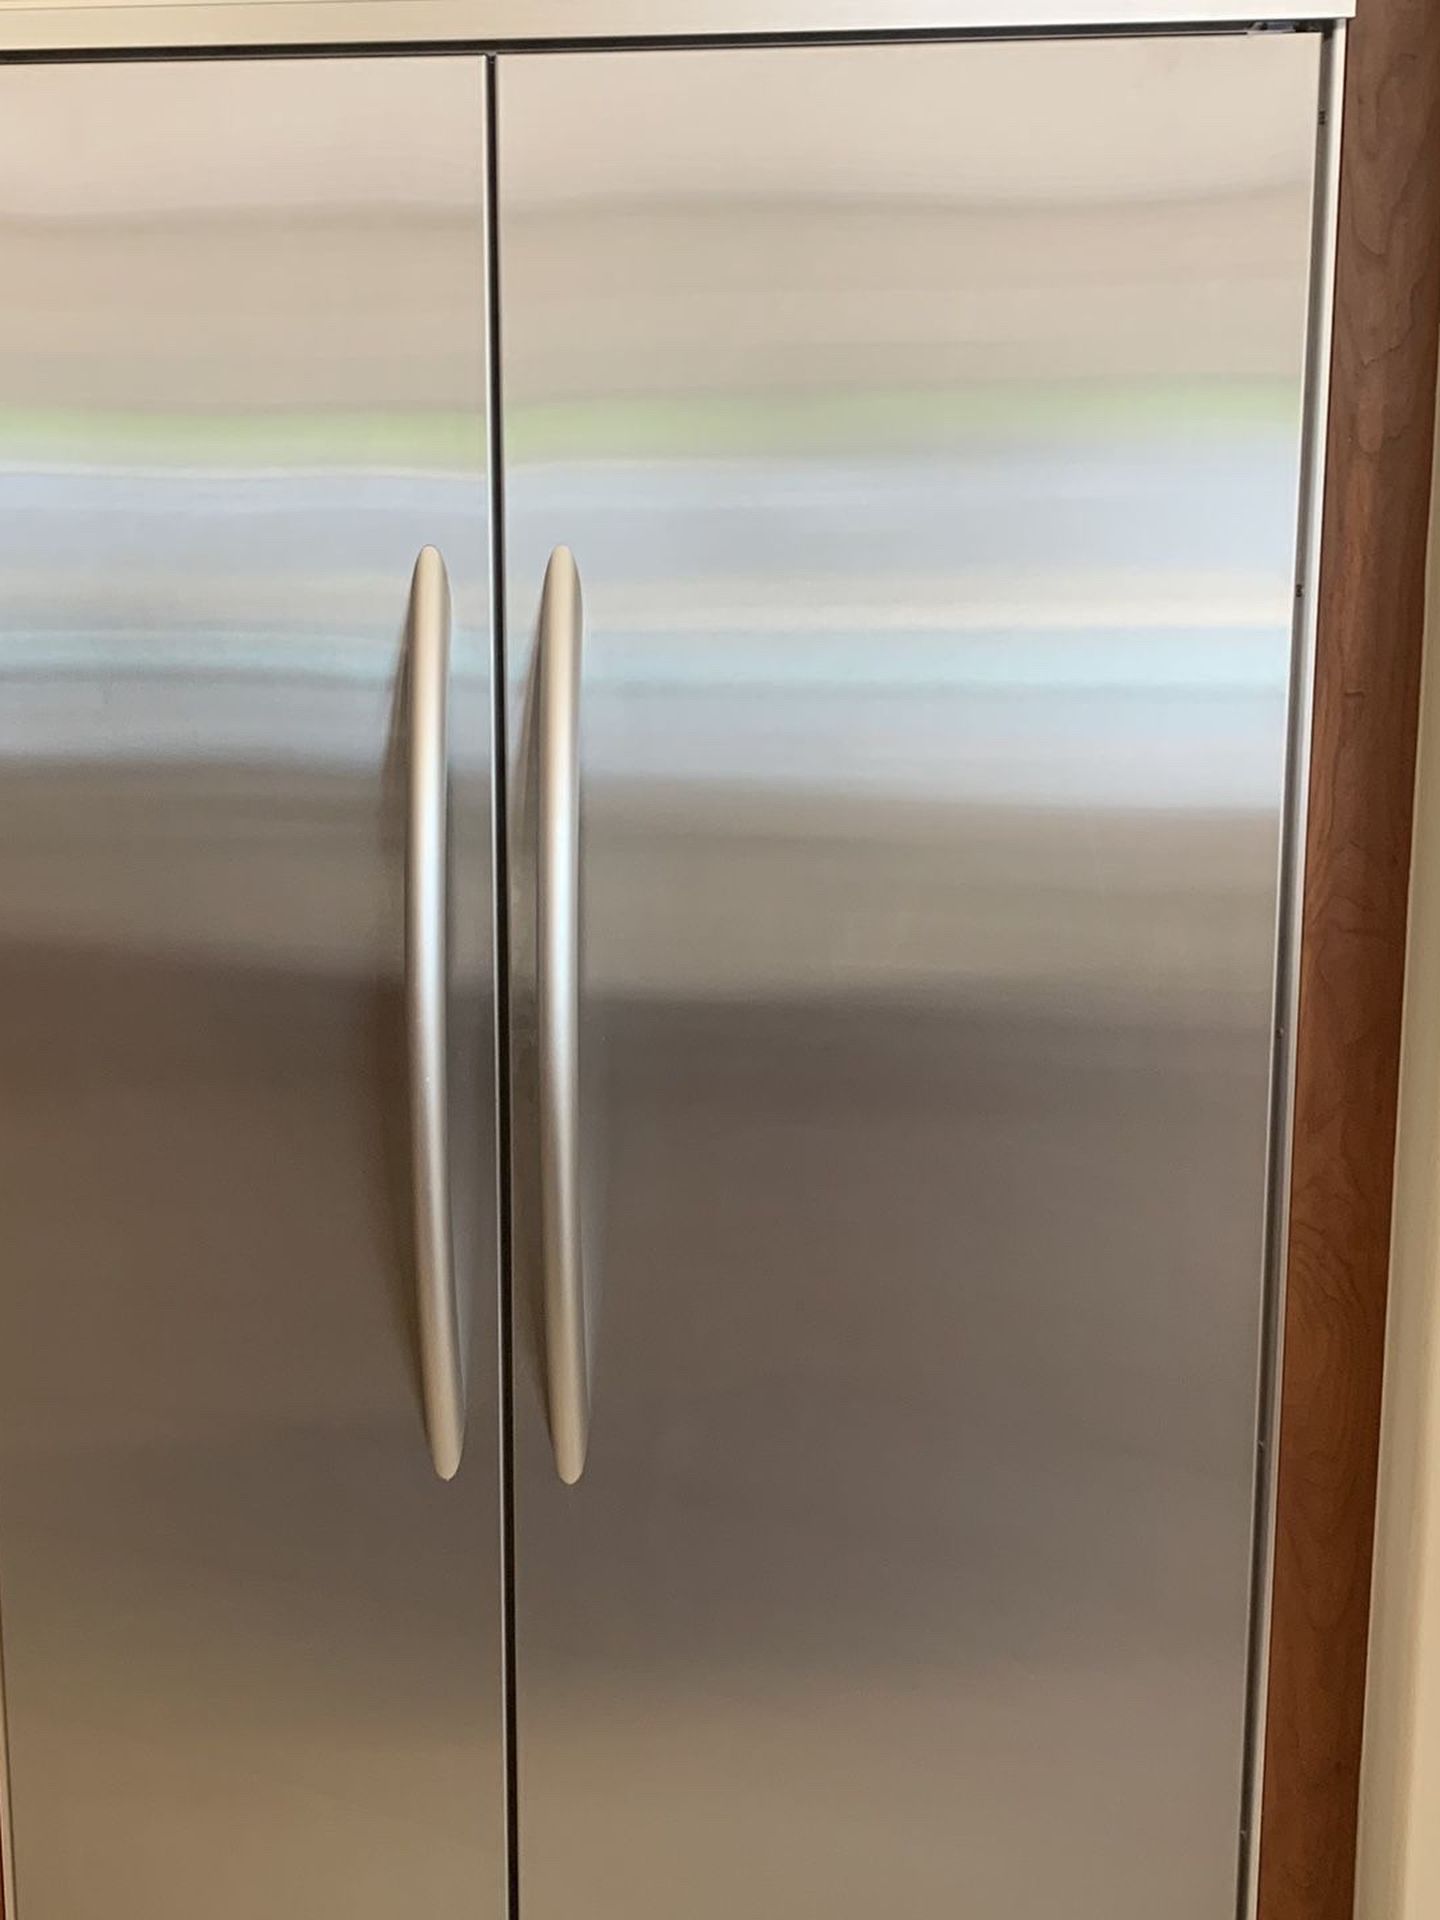 KitchenAid Built-in Side by Side 42” refrigerator